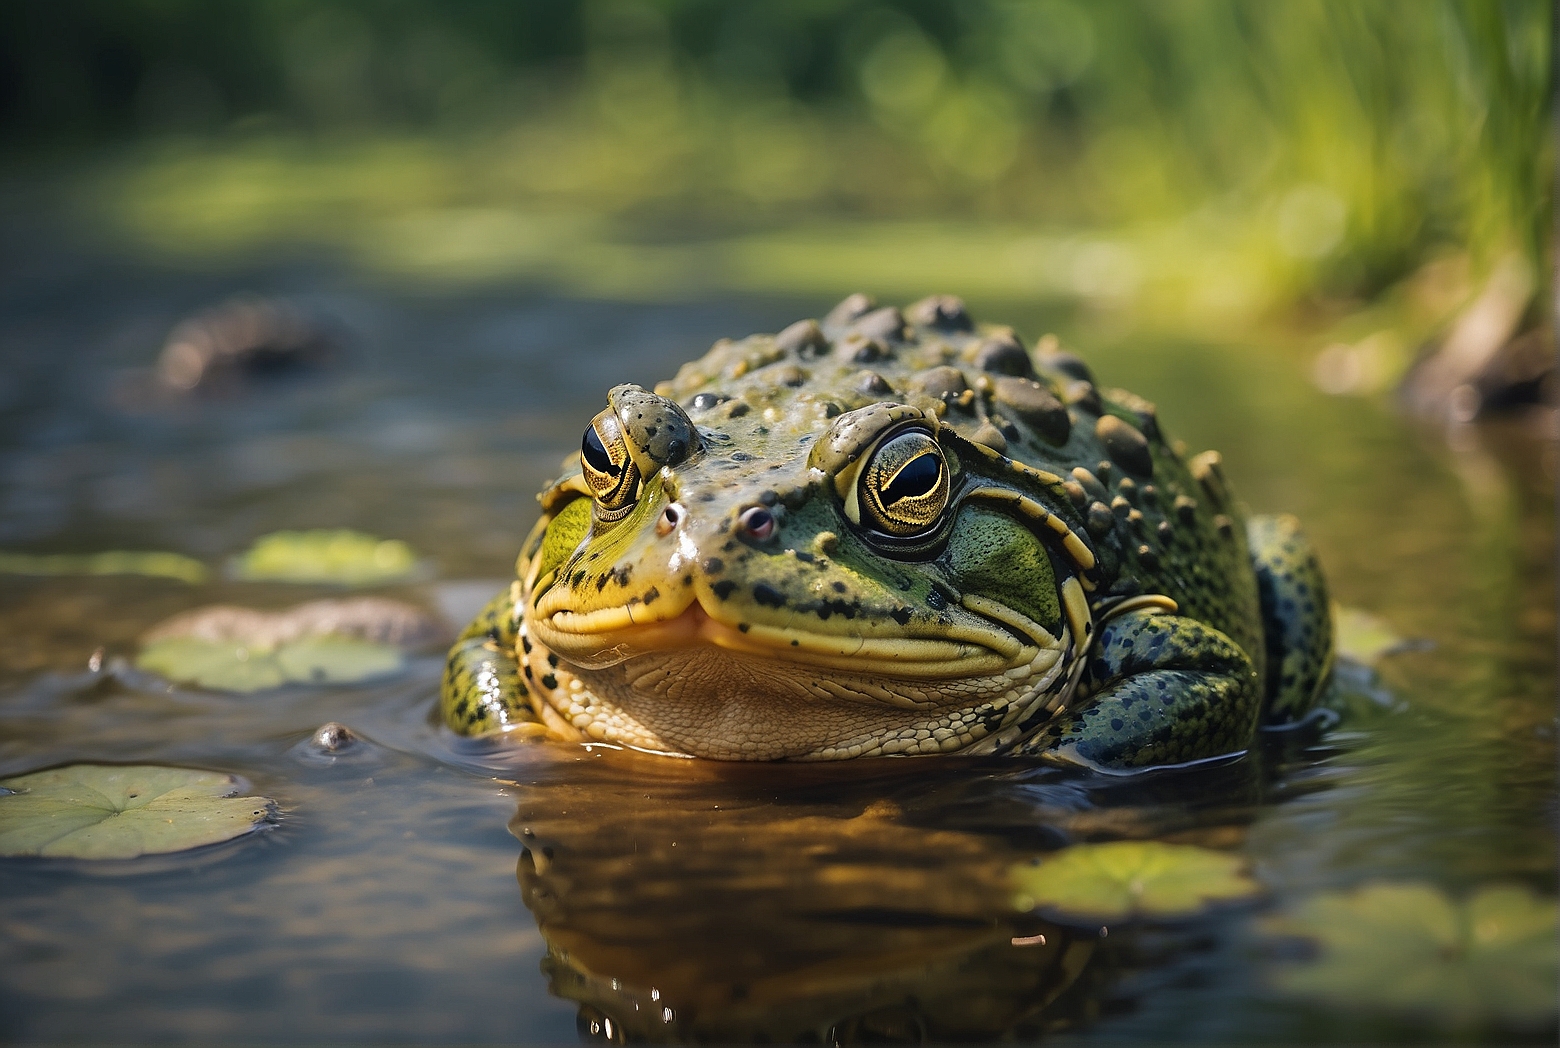 Tips and Tricks for Catching Bullfrogs